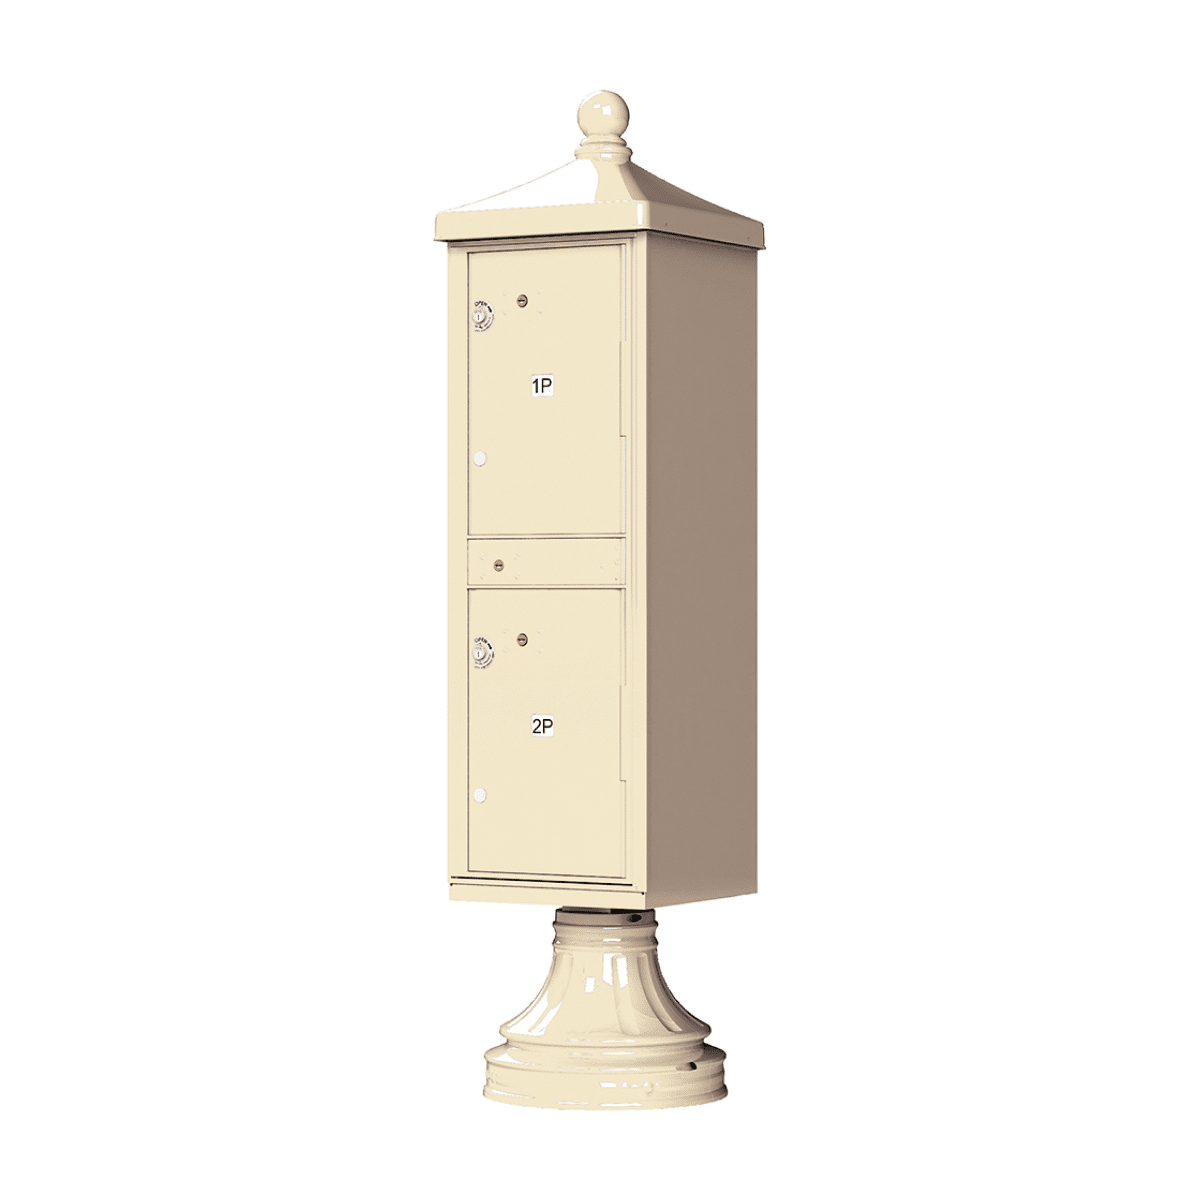 Florence CBU Cluster Mailbox – Vogue Traditional Kit, 2 Parcel Lockers Product Image